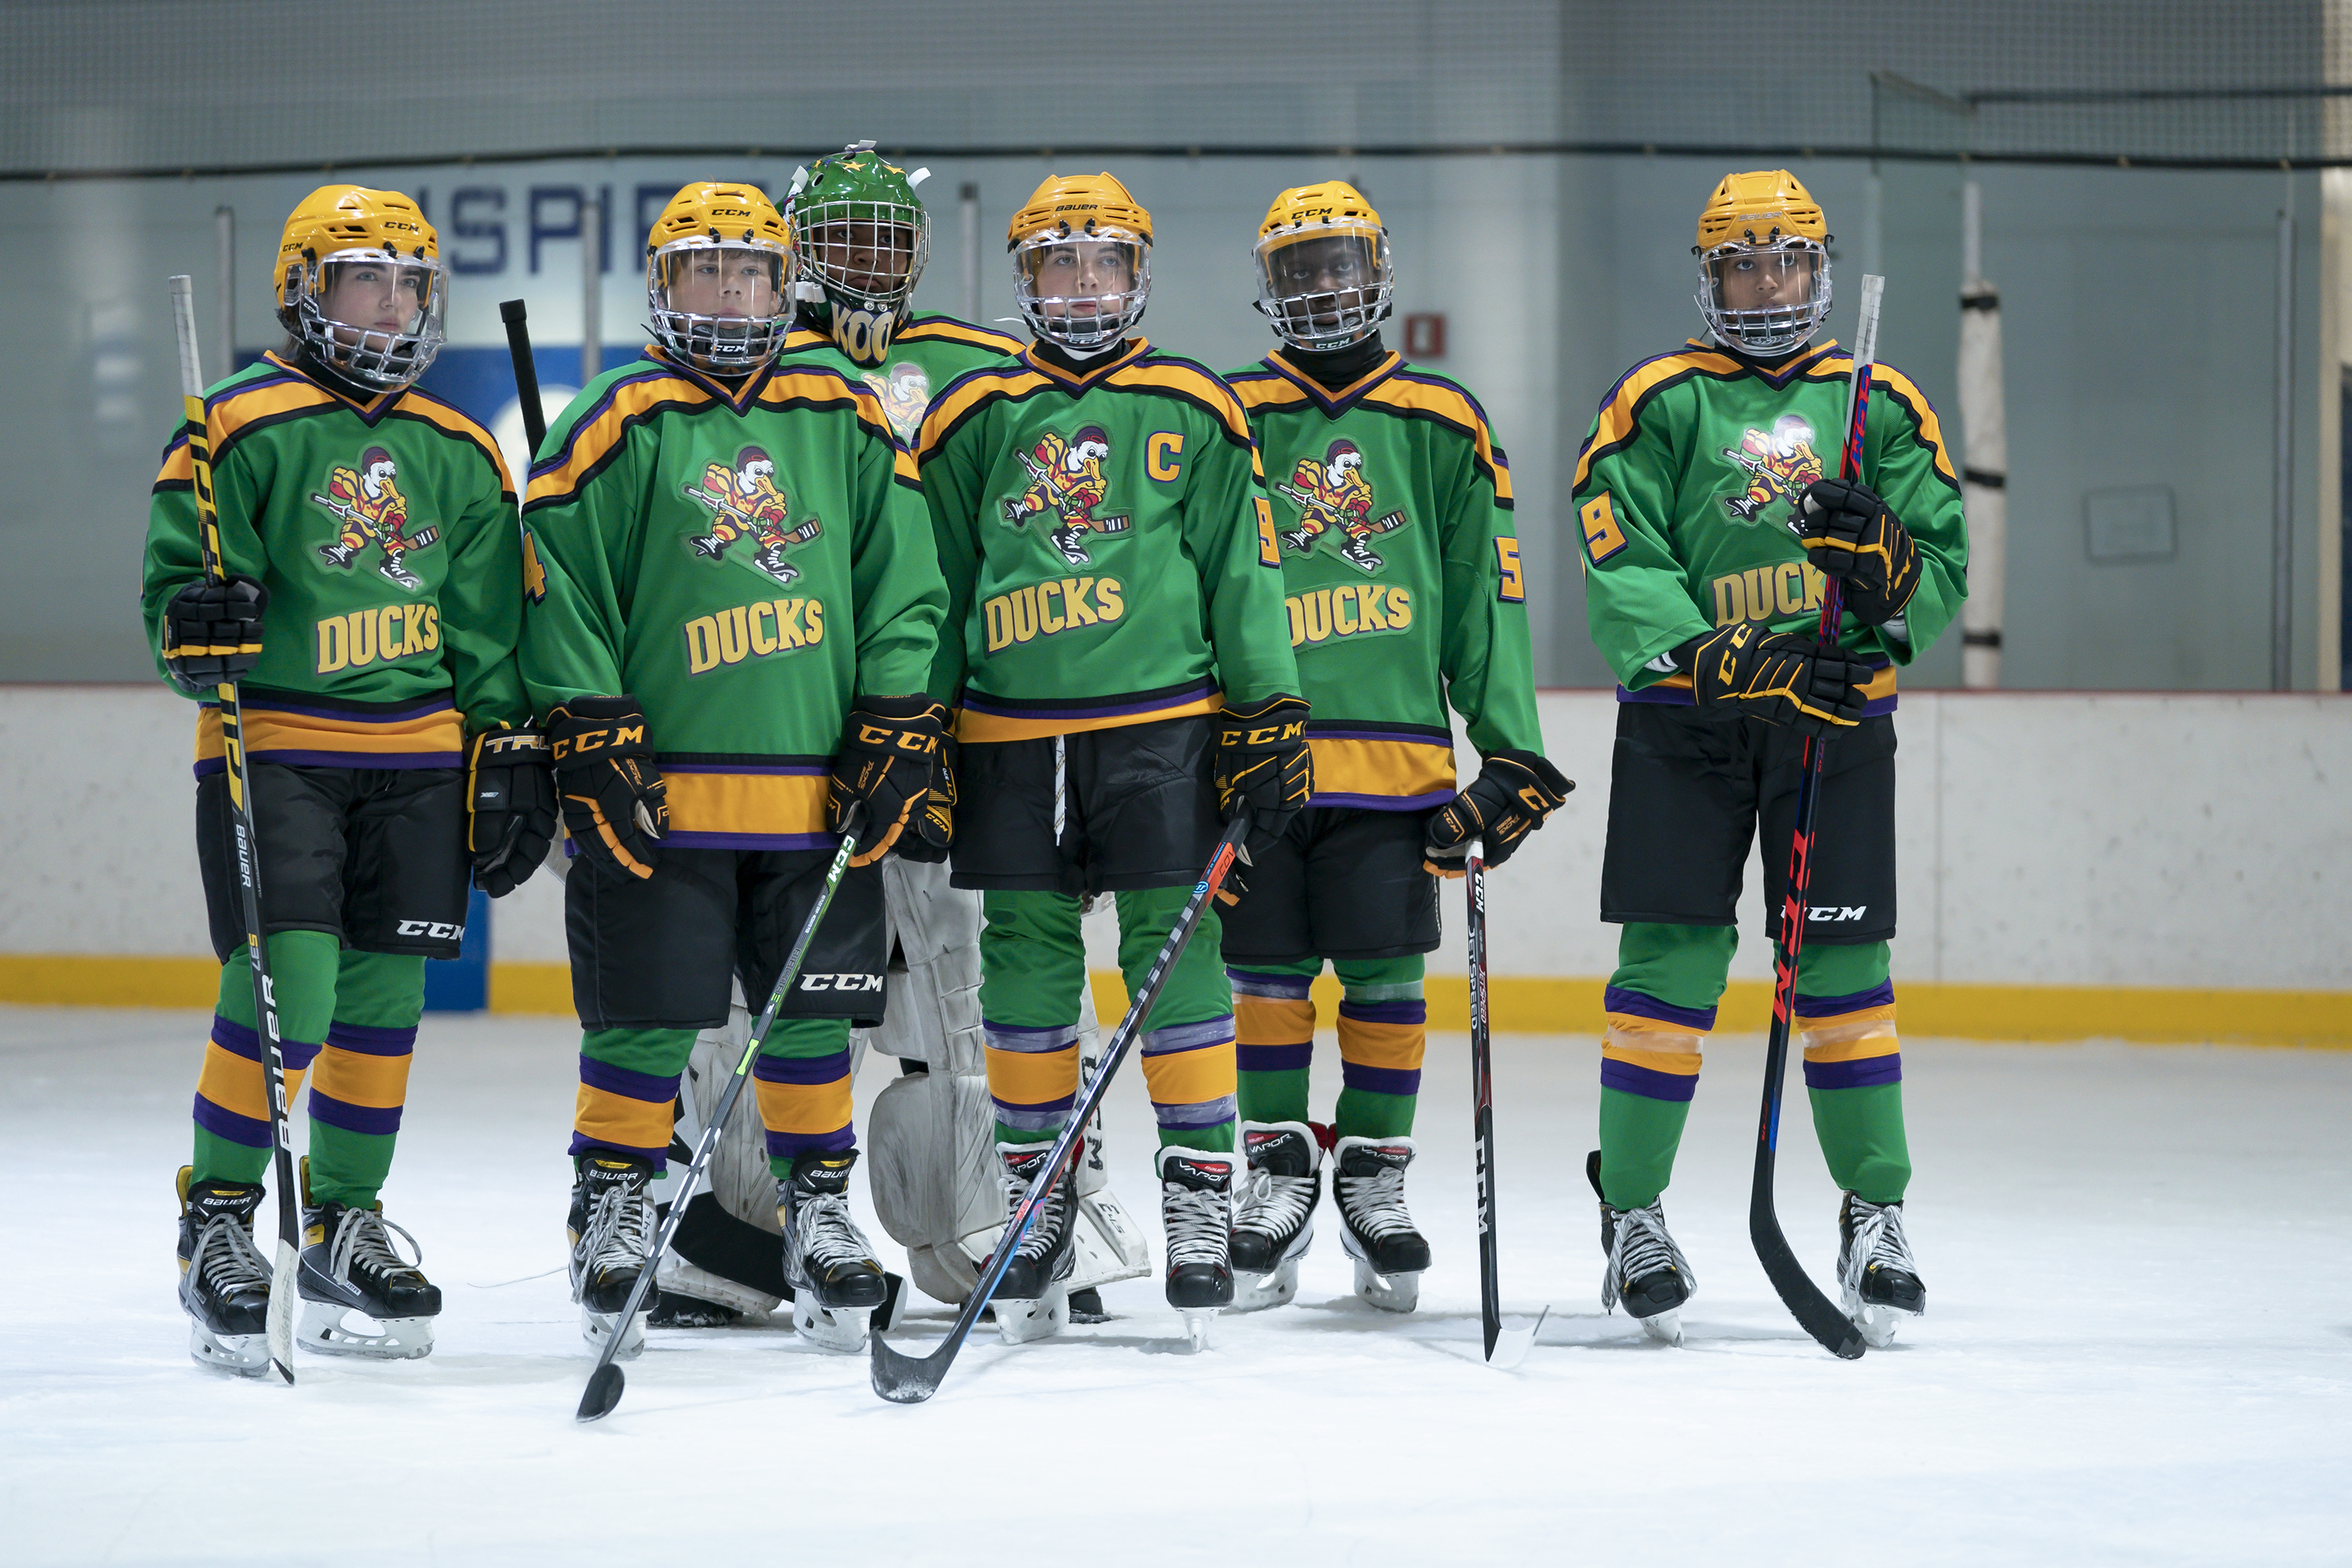 Has “The Mighty Ducks: Game Changers” Been Renewed For A Third